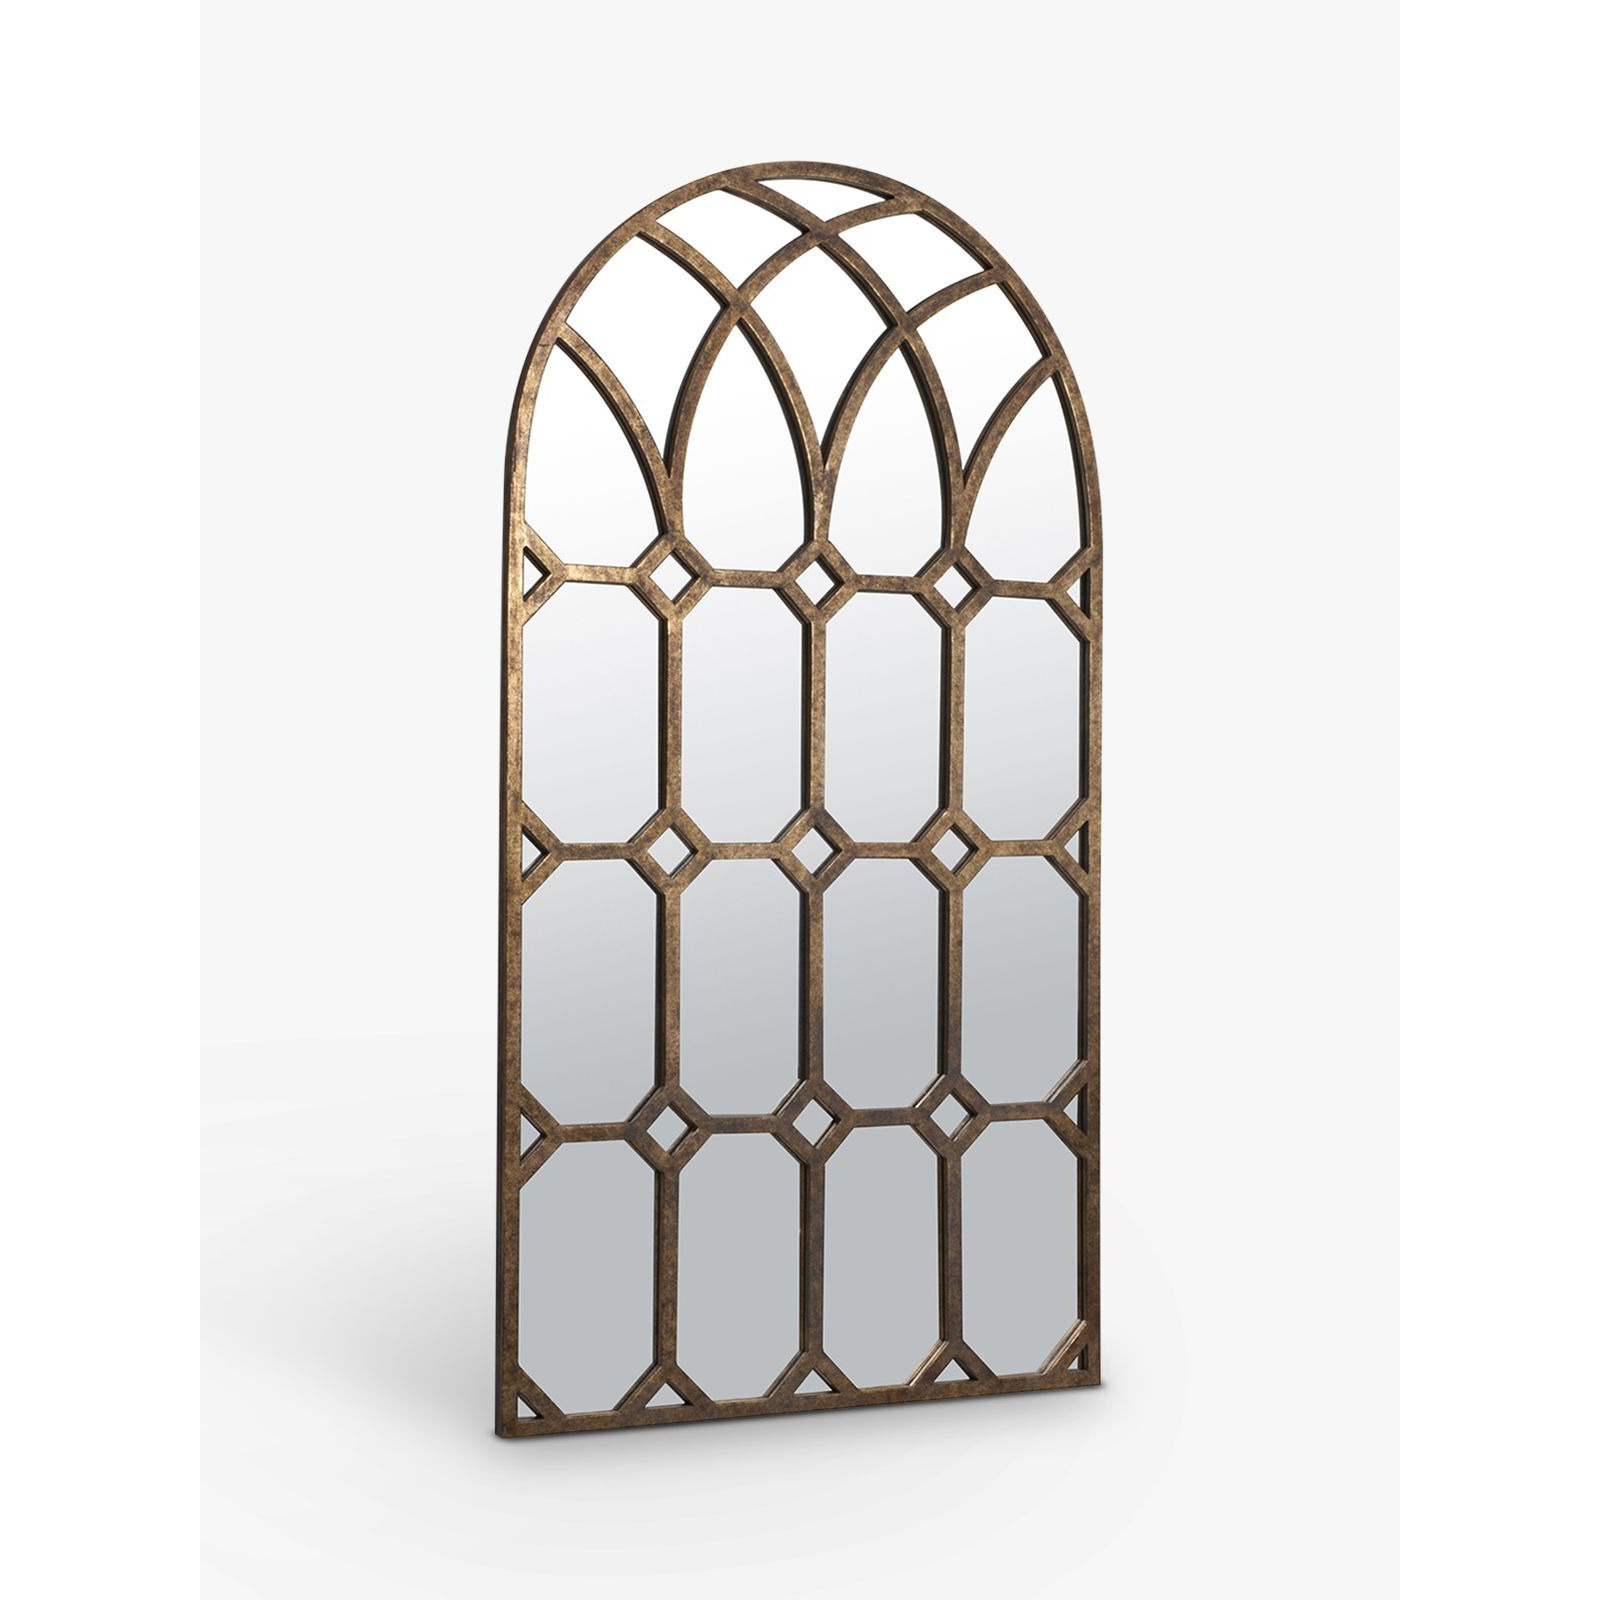 Gallery Direct Khadra Arched Window Wall Mirror, 160 x 80cm, Gold - image 1